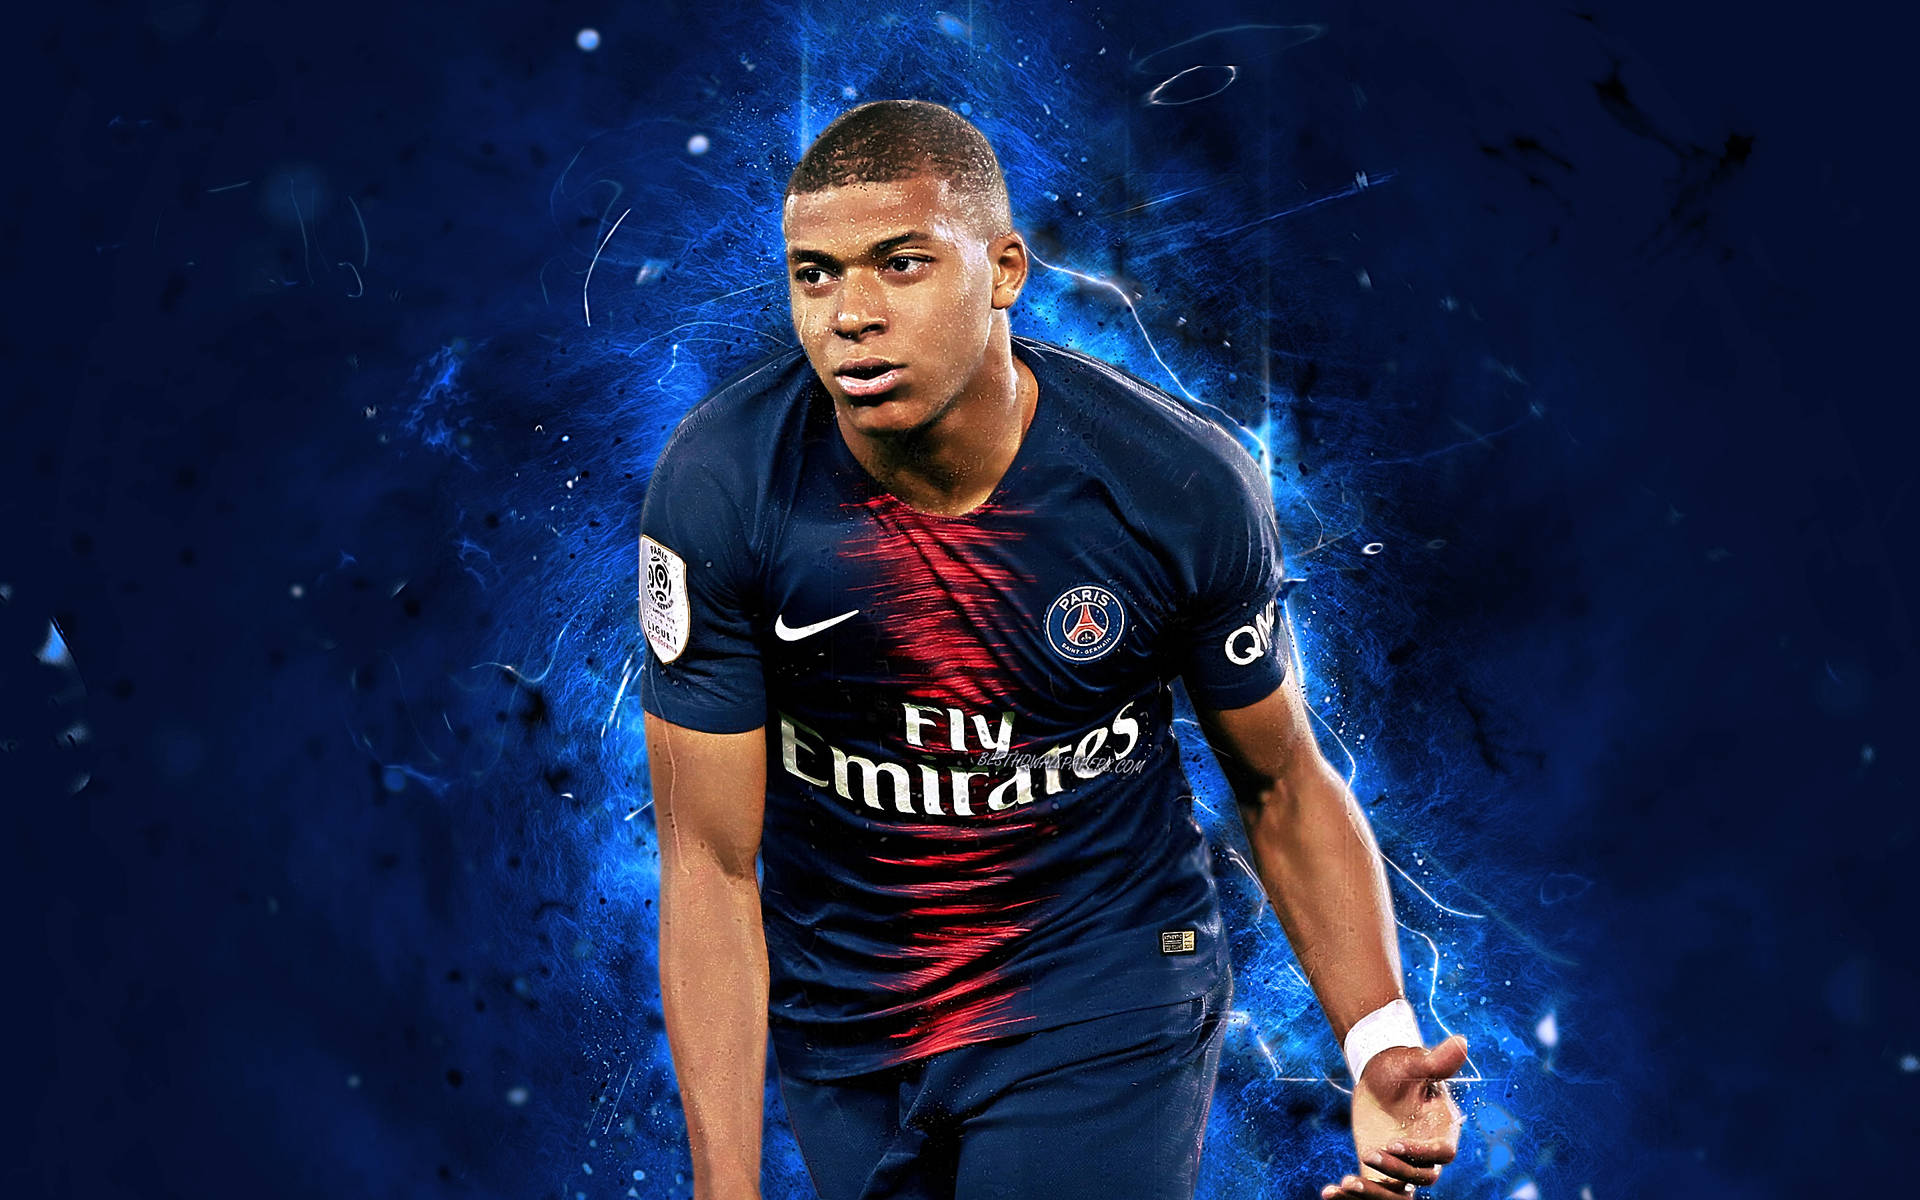 Emirates Player Mbappe